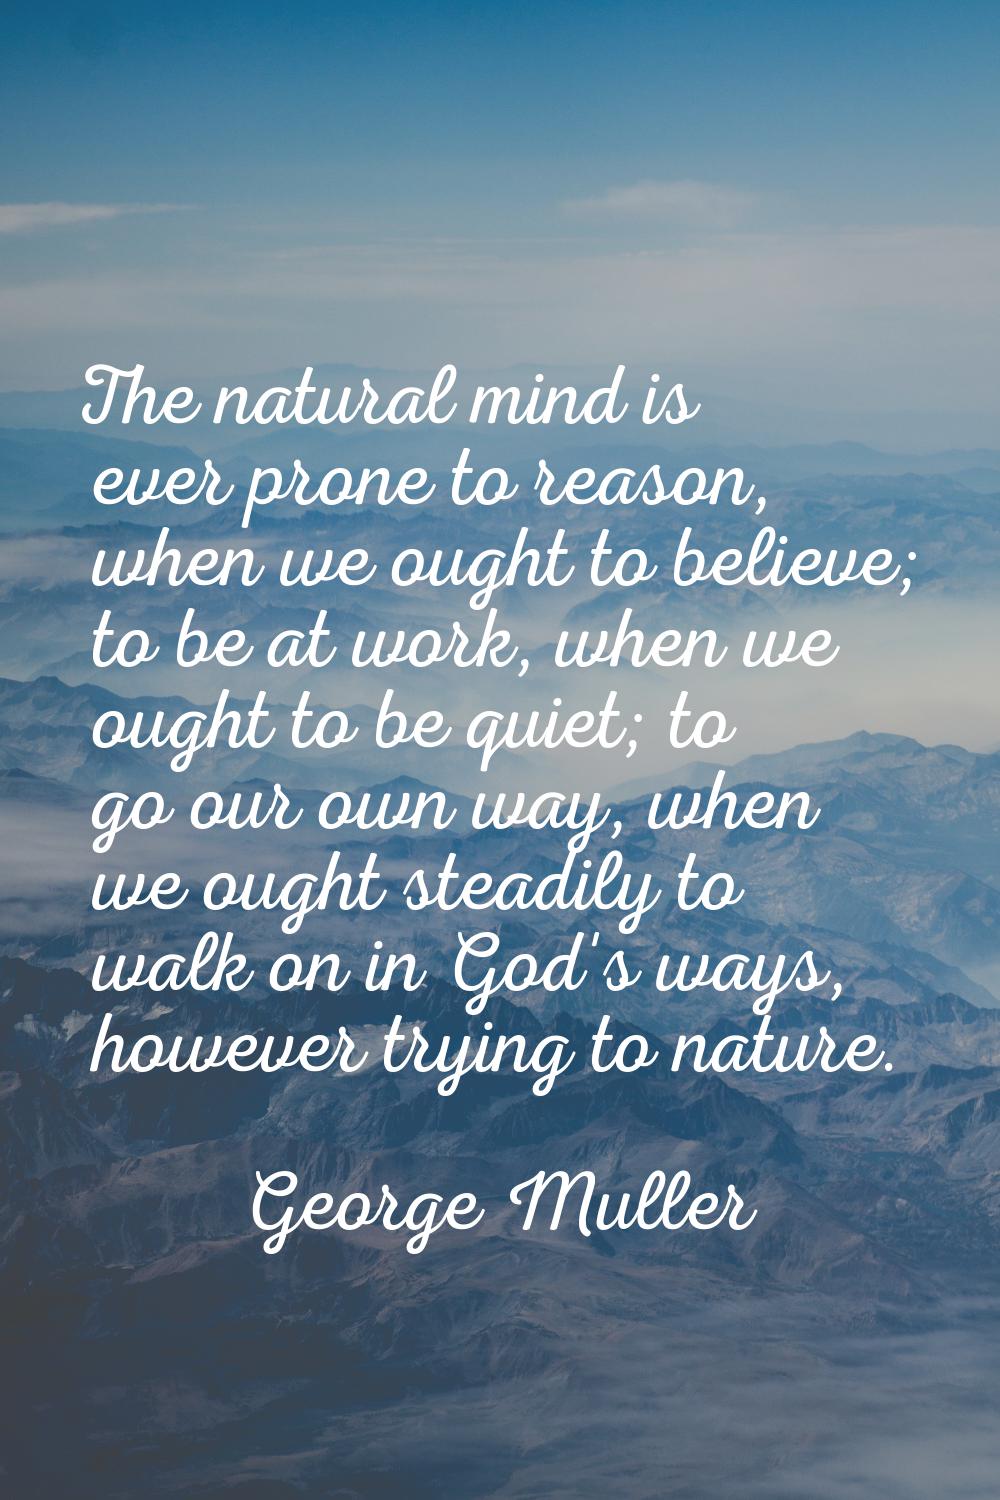 The natural mind is ever prone to reason, when we ought to believe; to be at work, when we ought to